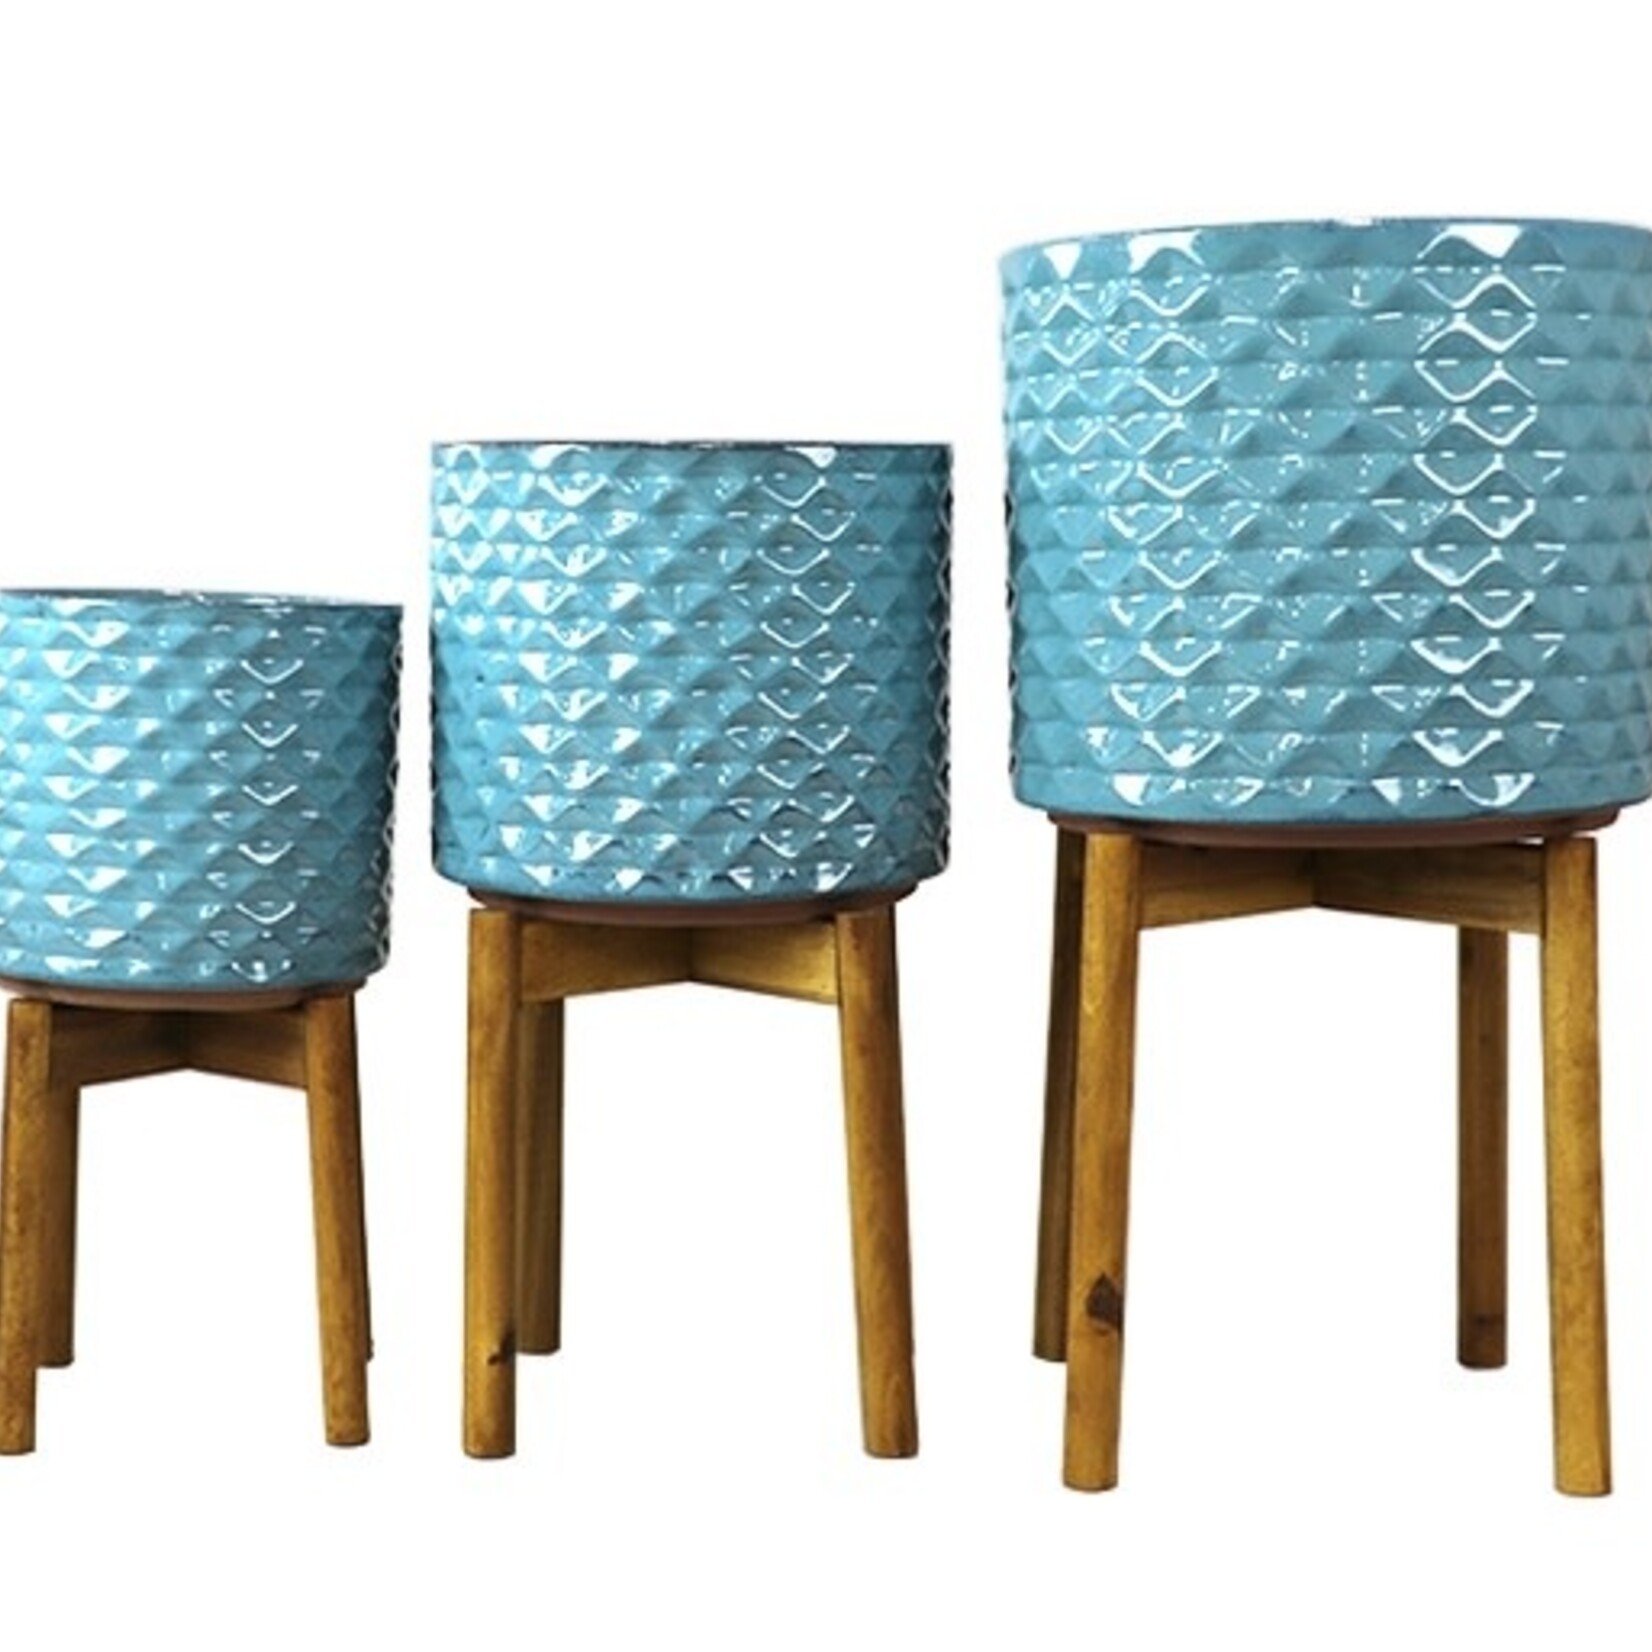 Blue Rae Plant Stands - Small Turquoise